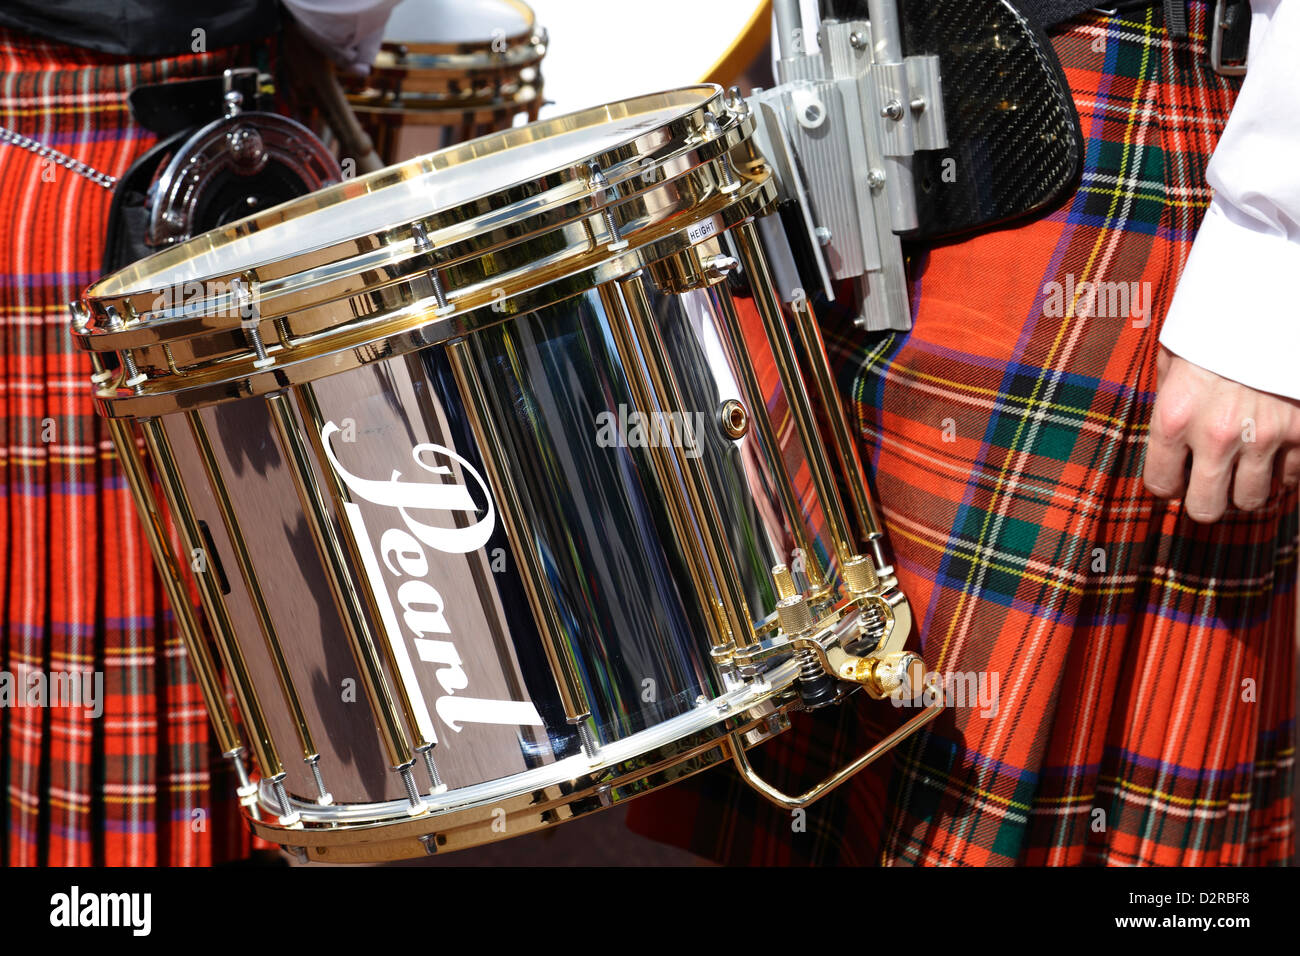 A drummer from the Strathclyde Police Pipe Band at the Piping Live Event, Glasgow, Scotland, UK Stock Photo